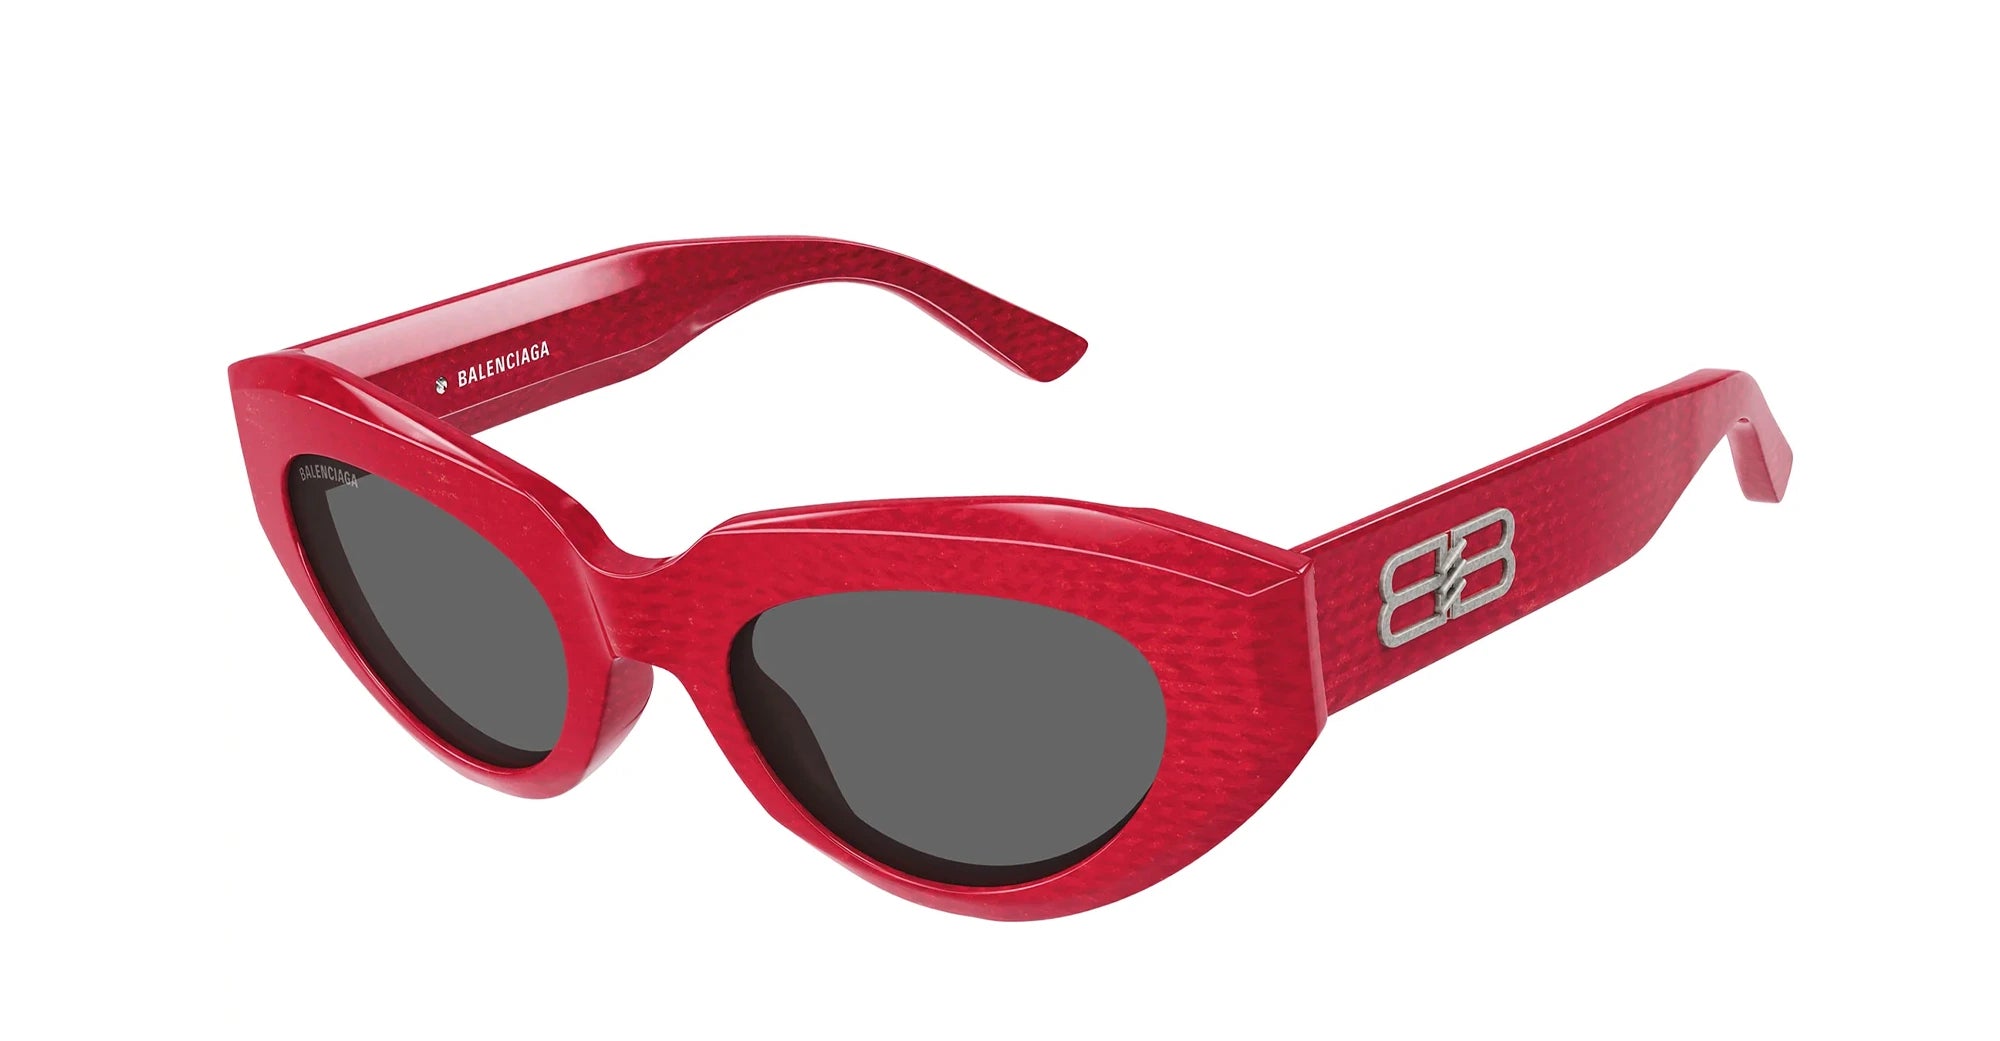 Bb0236s-003 - red